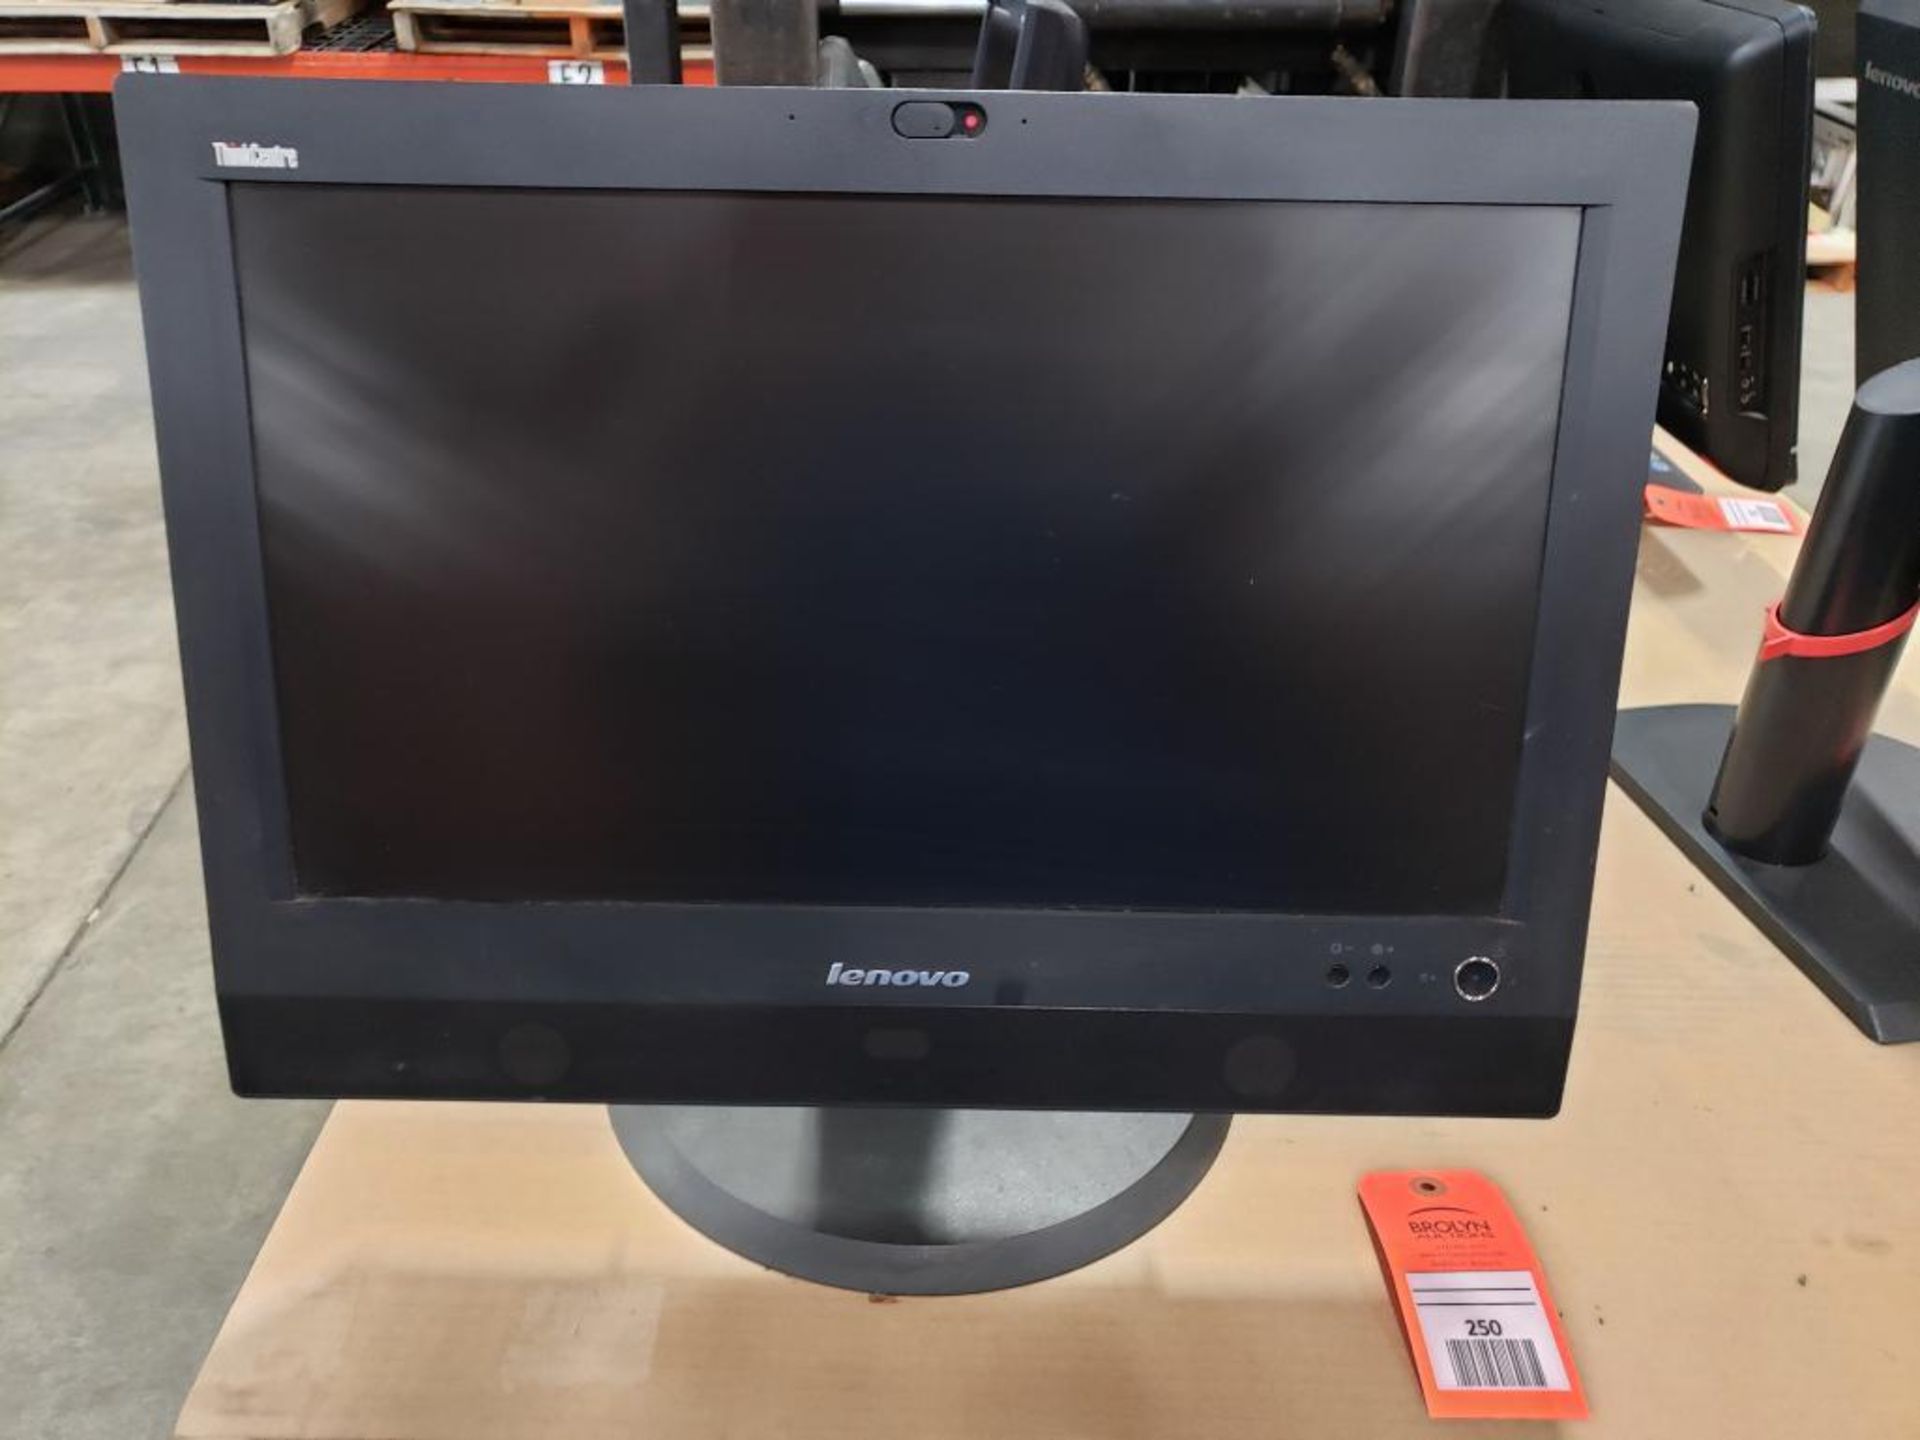 Lenovo ThinkCentre M72z All-in-One PC. Machine Type: 3548, M/N: D1U, S/N: MJ1023Y.